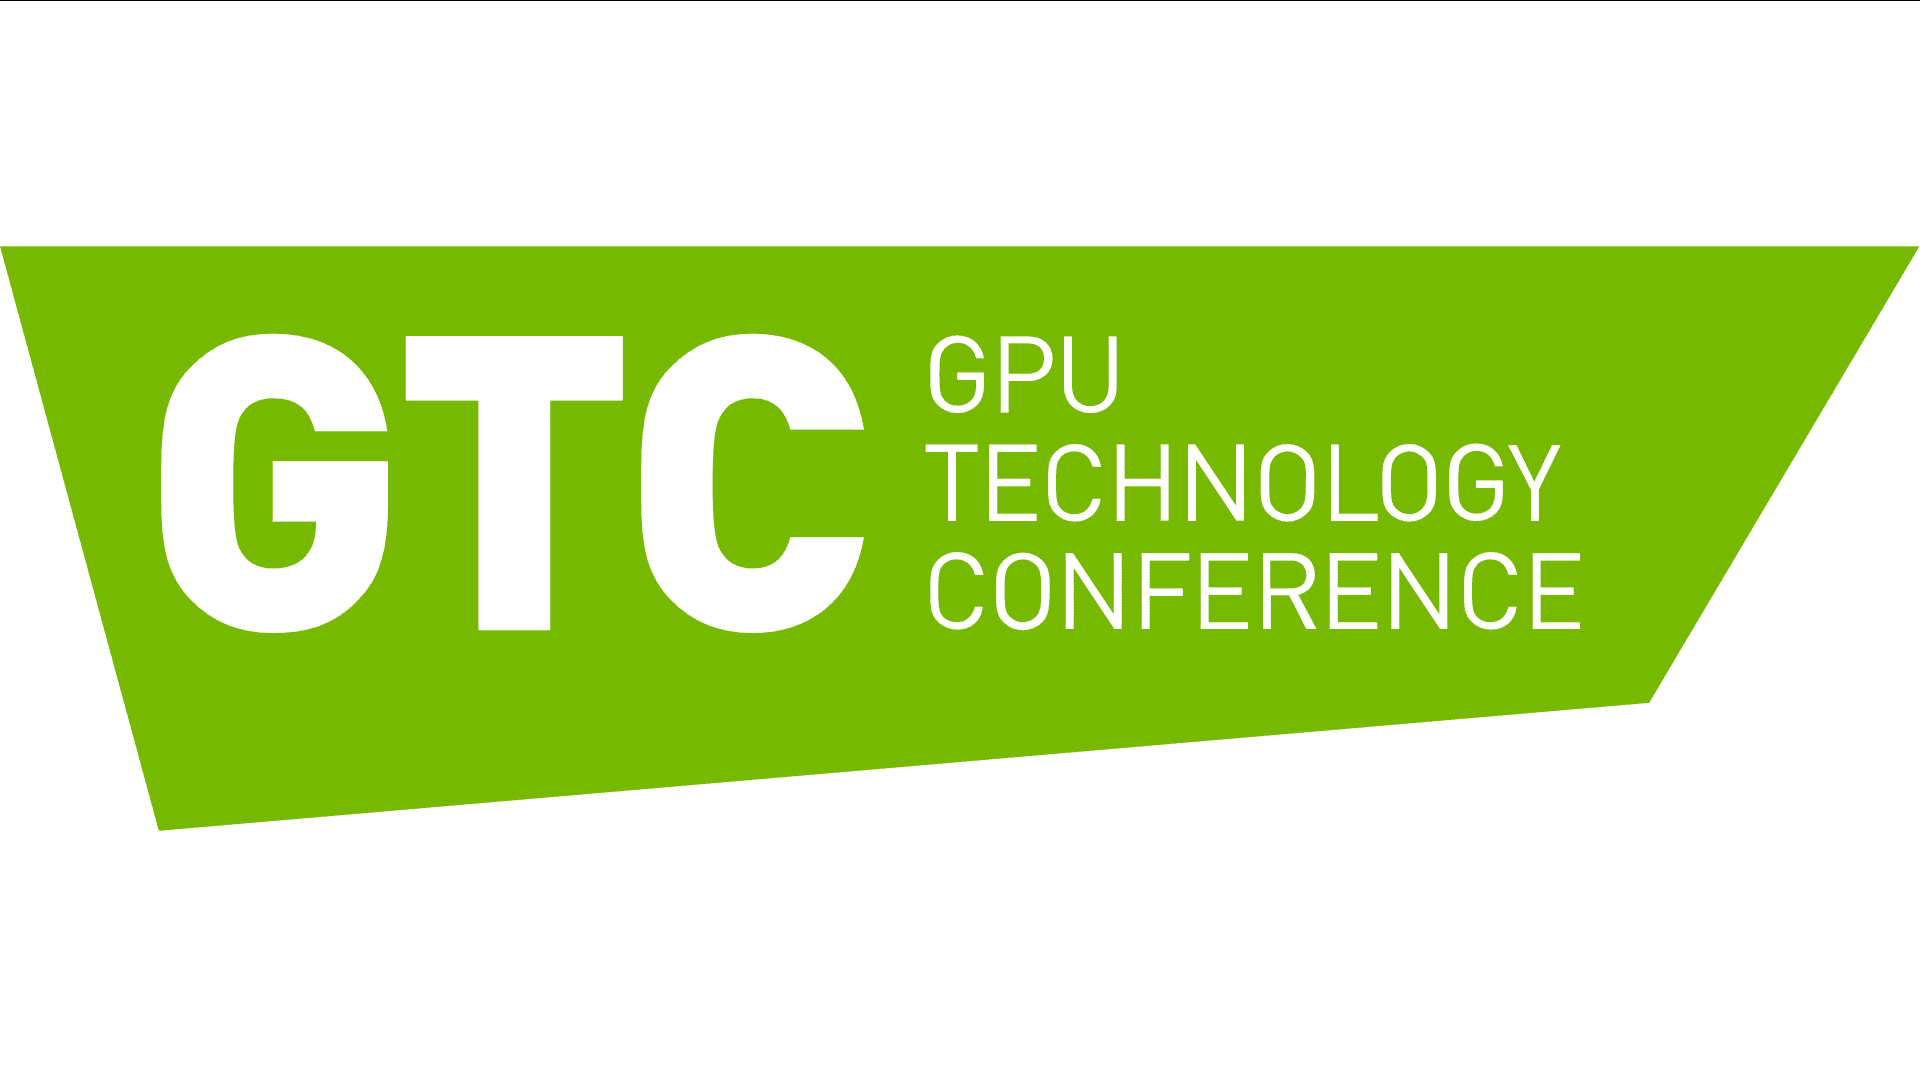 Dany Shapiro discusses Nvidia and the 2020 GTC Technology Conference.